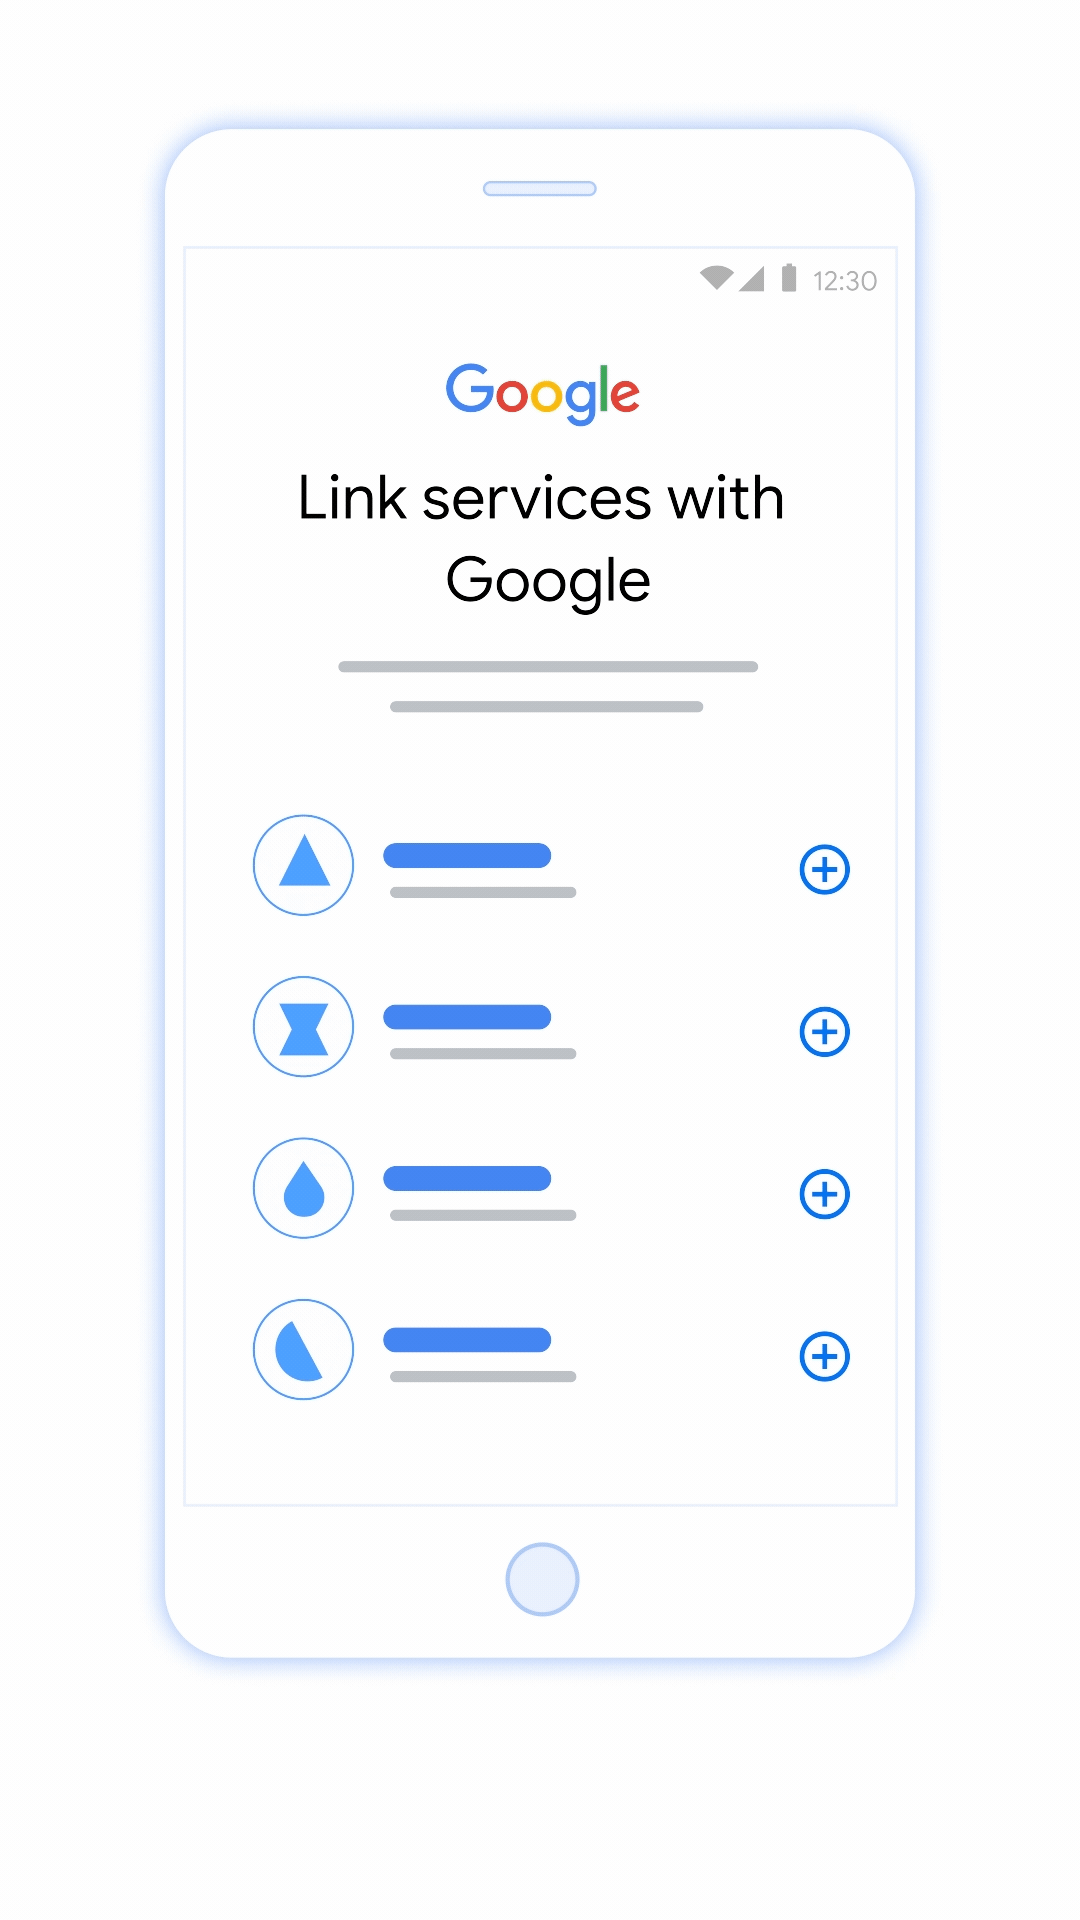 The animated graphic shows the steps you take to complete the simplified linking process within a Google app.  You will be prompted to give the third-party app permission to view your basic Google account profile information, including your email address, which the third-party app will use to check if you already have a user account on their app. If an account associated with your email is found, you will be prompted to consent to complete the linking process. Otherwise, you will be notified to use your email address to create an account on the third-party app to complete the linking process.